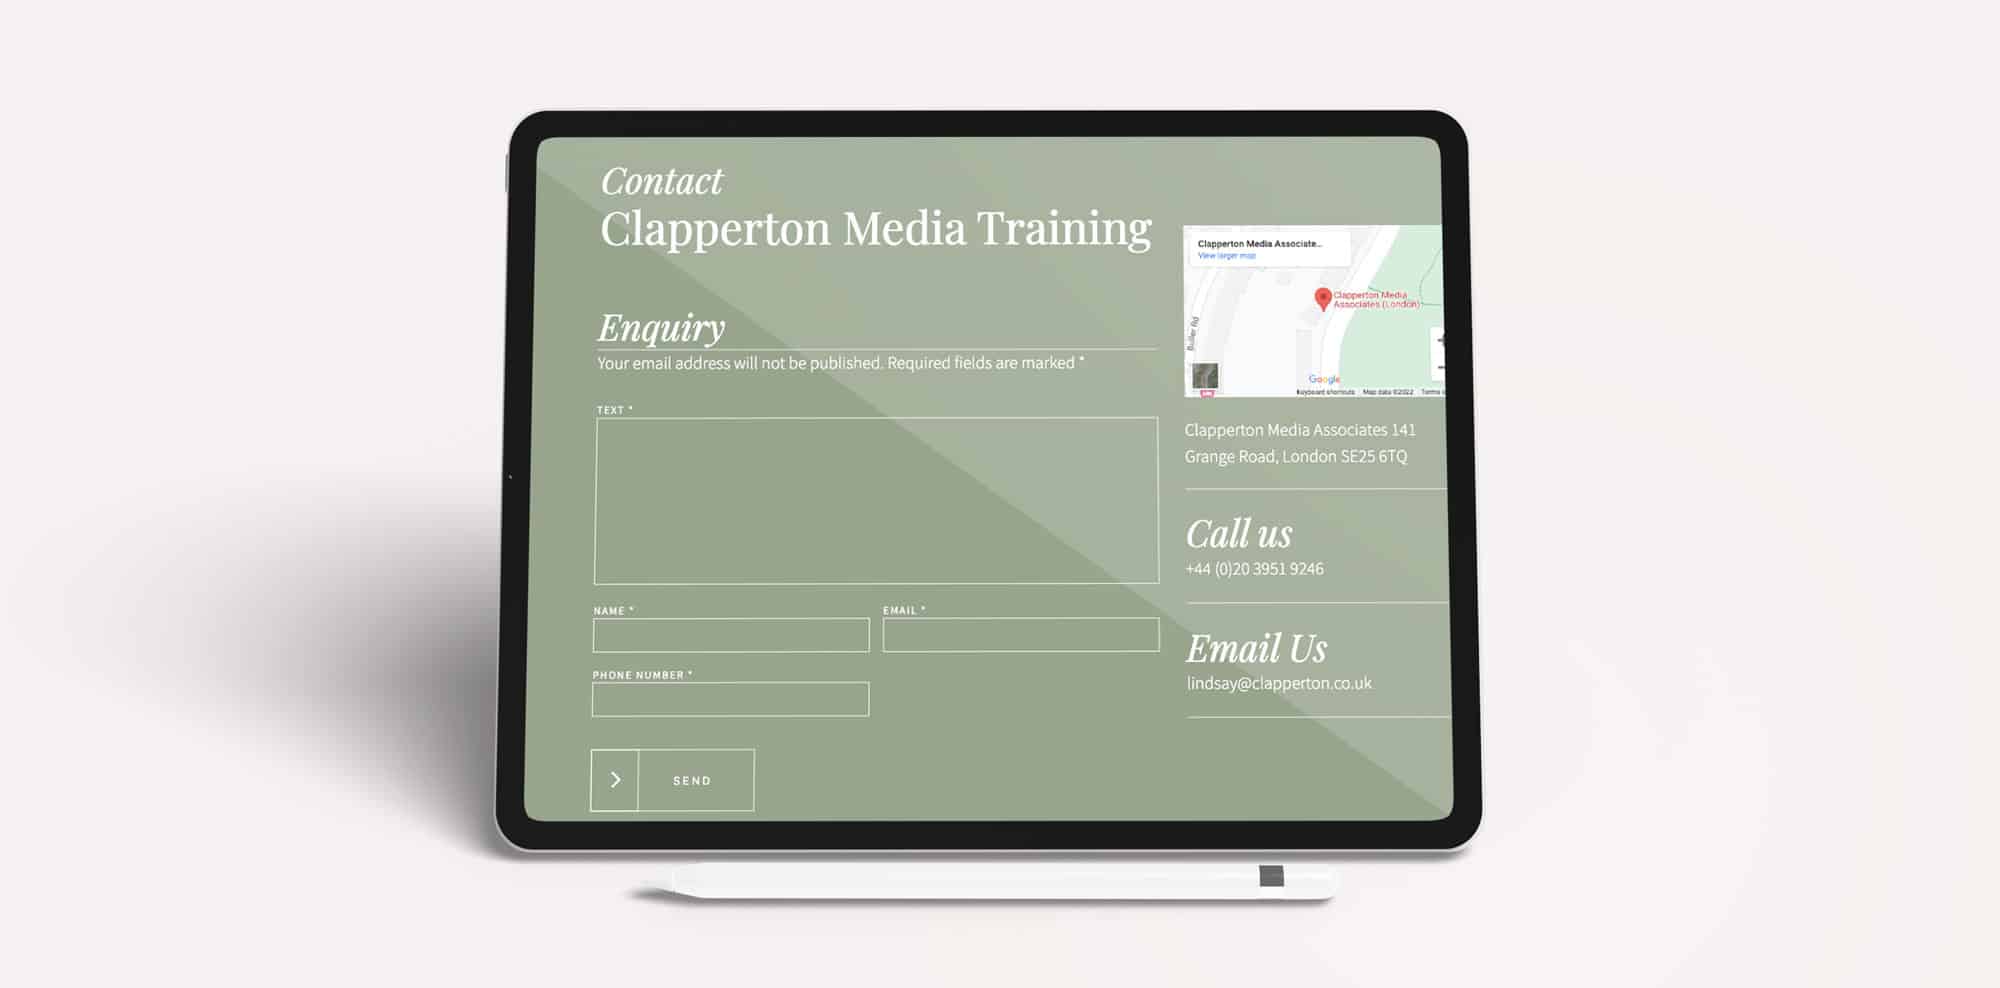 The Clapperton Media website contact page displayed on an iPad